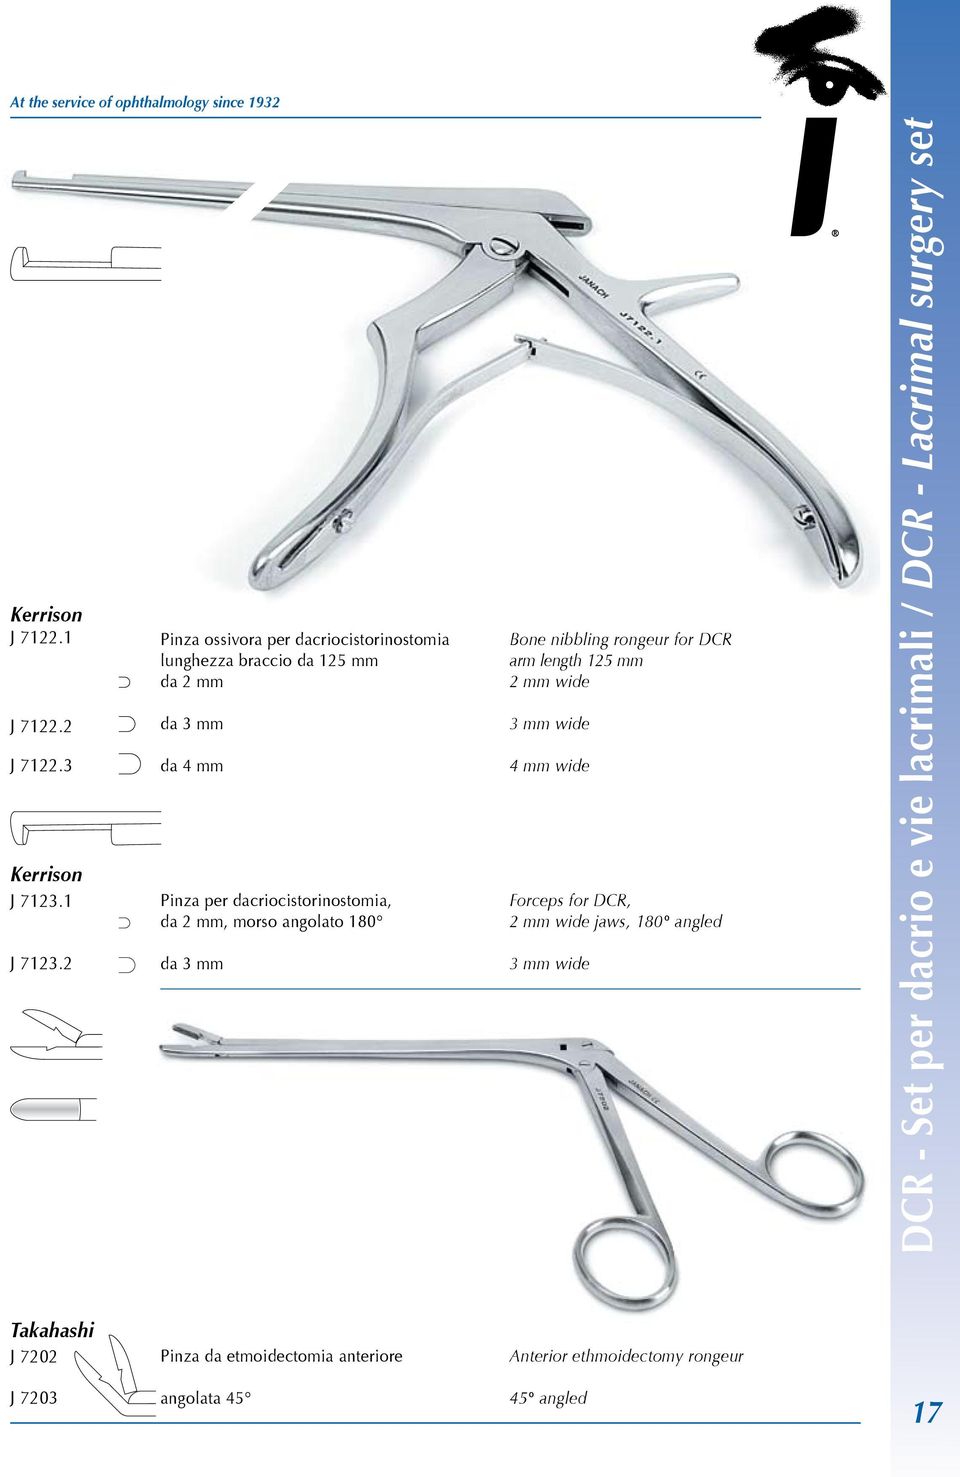 angolato 180 da 3 mm Bone nibbling rongeur for DCR arm length 125 mm 2 mm wide 3 mm wide 4 mm wide Forceps for DCR, 2 mm wide jaws, 180 angled 3